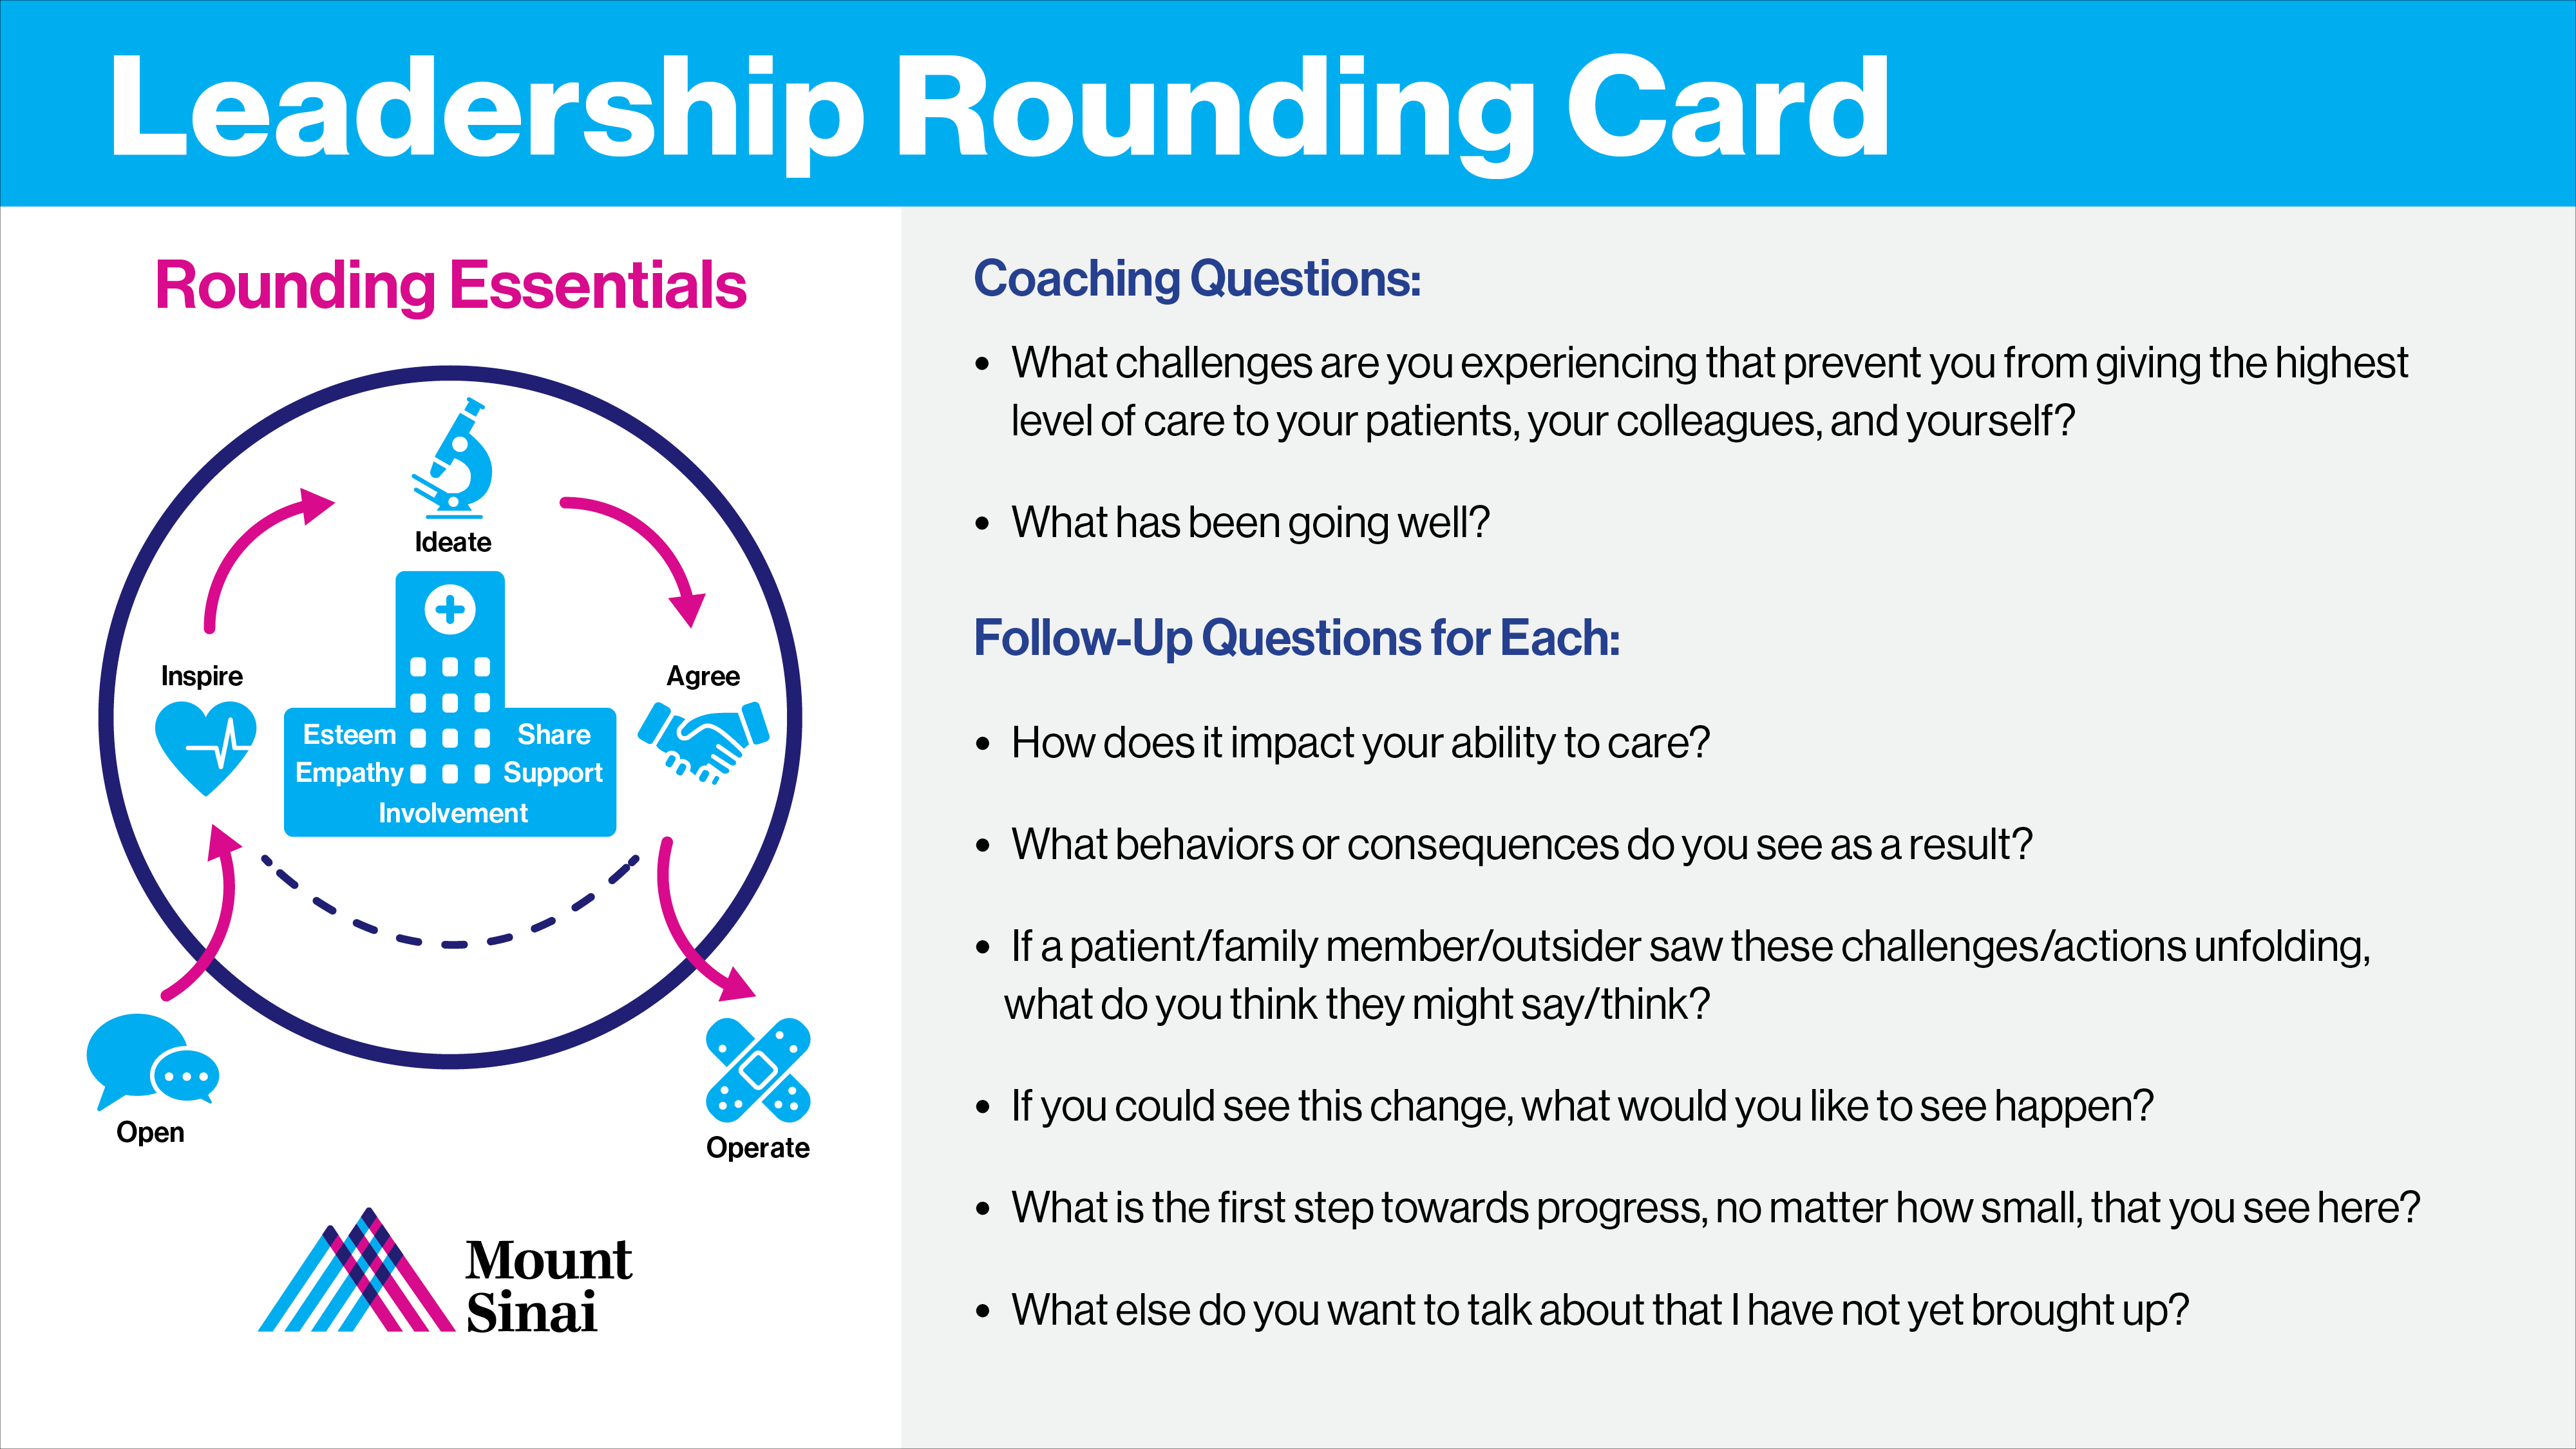 The Leadership Rounding Card suggests questions to prompt meaningful dialogue.